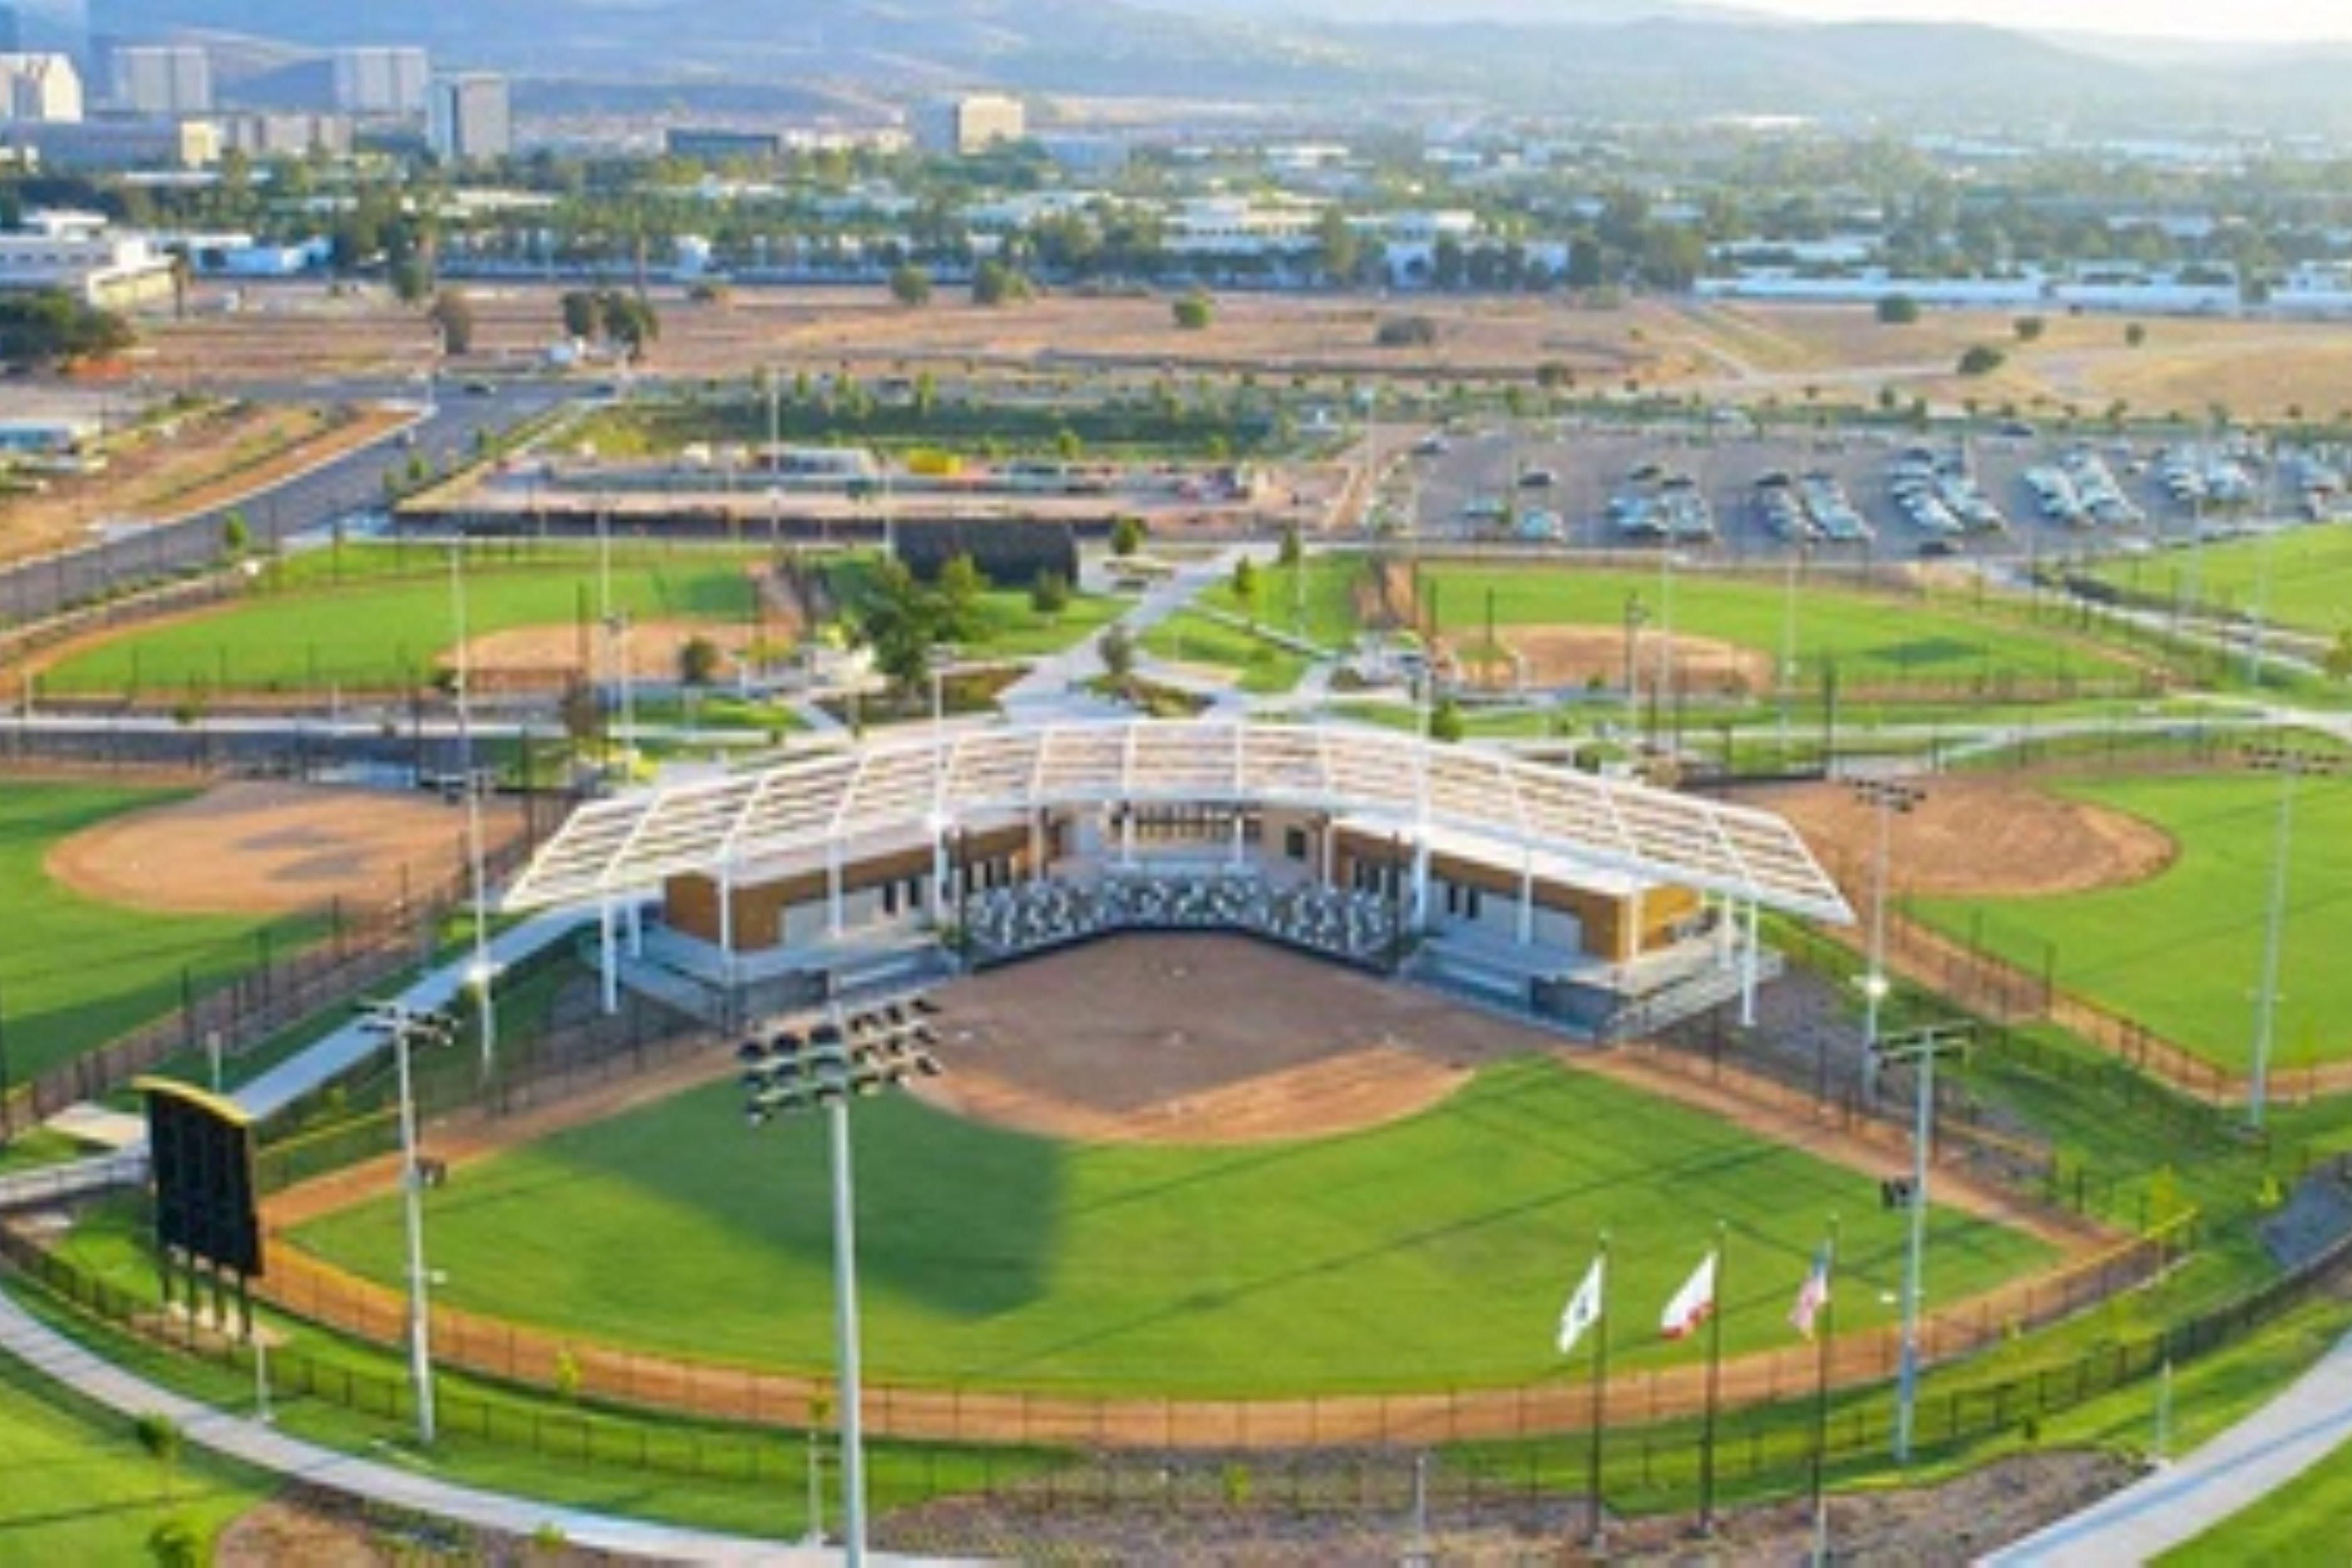 Sports Complex – A 194-acre venue which is now home to a championship soccer stadium, home of Orange County's only professional soccer team, OC Soccer Club, 12 baseball and softball fields, 13 soccer fields, 5 sand volleyball courts, 25 tennis courts, 8 basketball courts, flexible field space, and a children’s play area.

